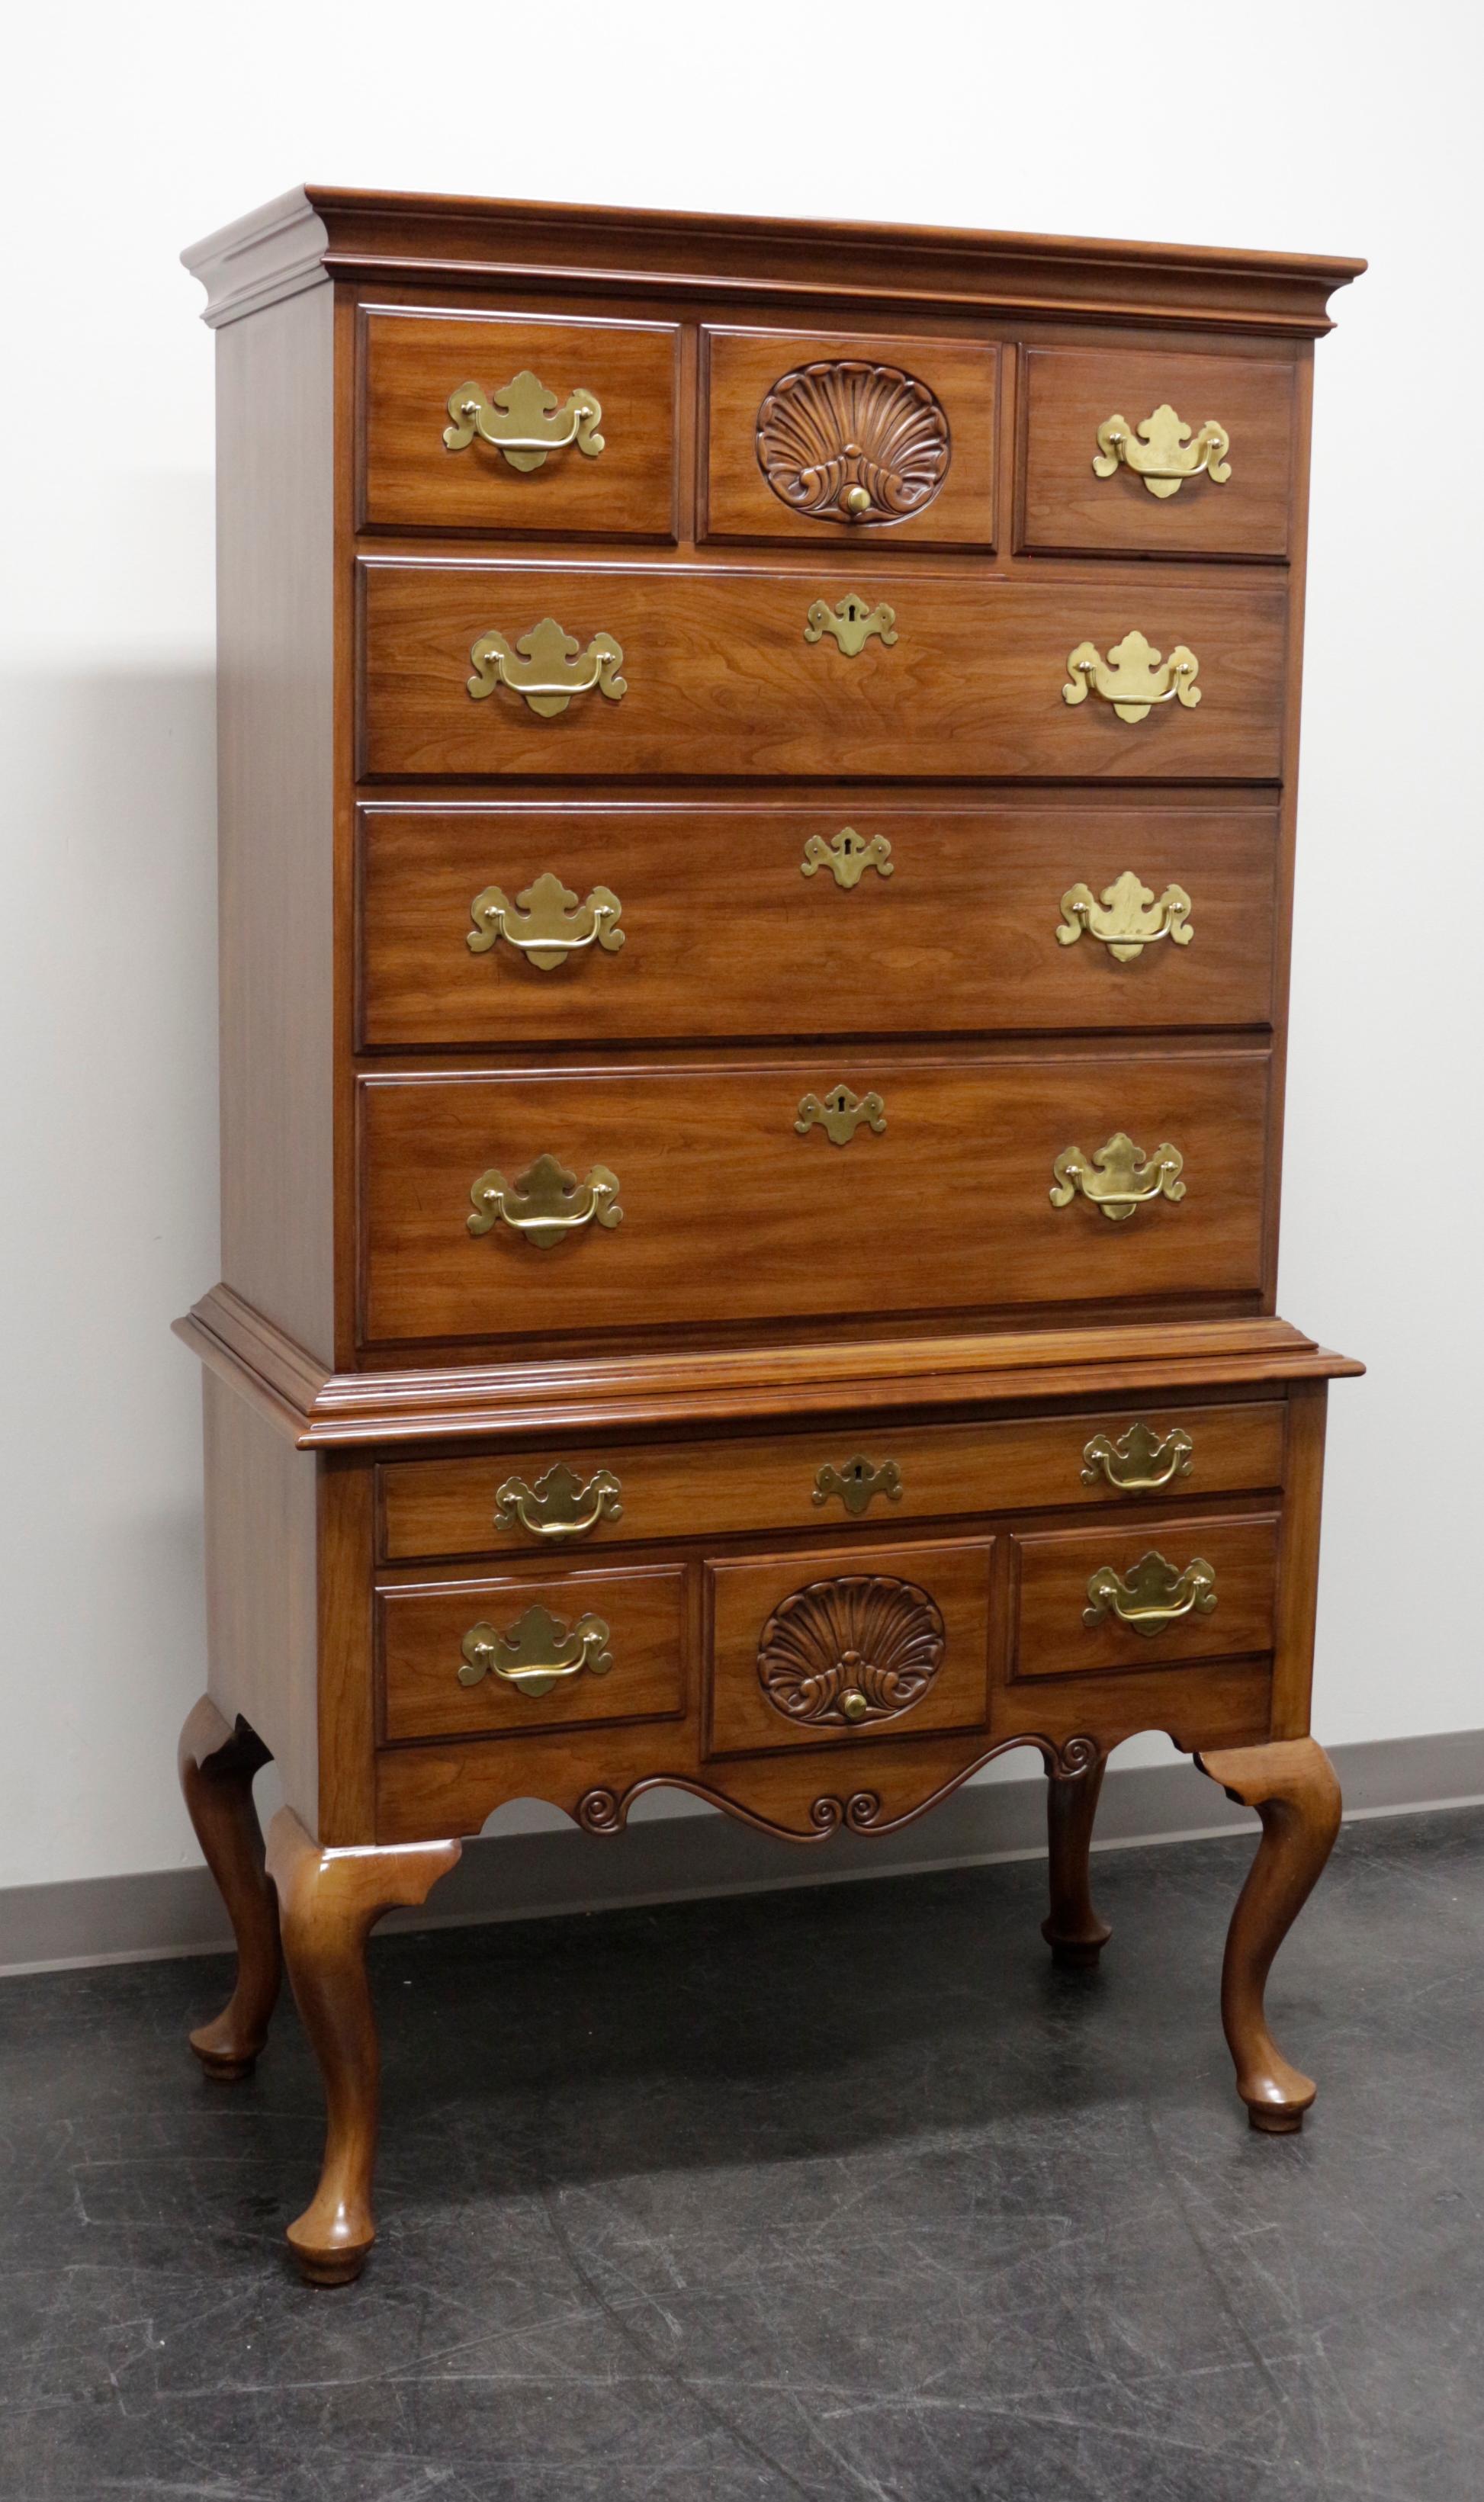 A Queen Anne style highboy chest of drawers by Henkel Harris of Winchester, Virginia, USA. Made in 1968. Solid wild black cherry with brass hardware. Features ten dovetailed drawers, four lockable with key, crown molding at top, cabriole legs and